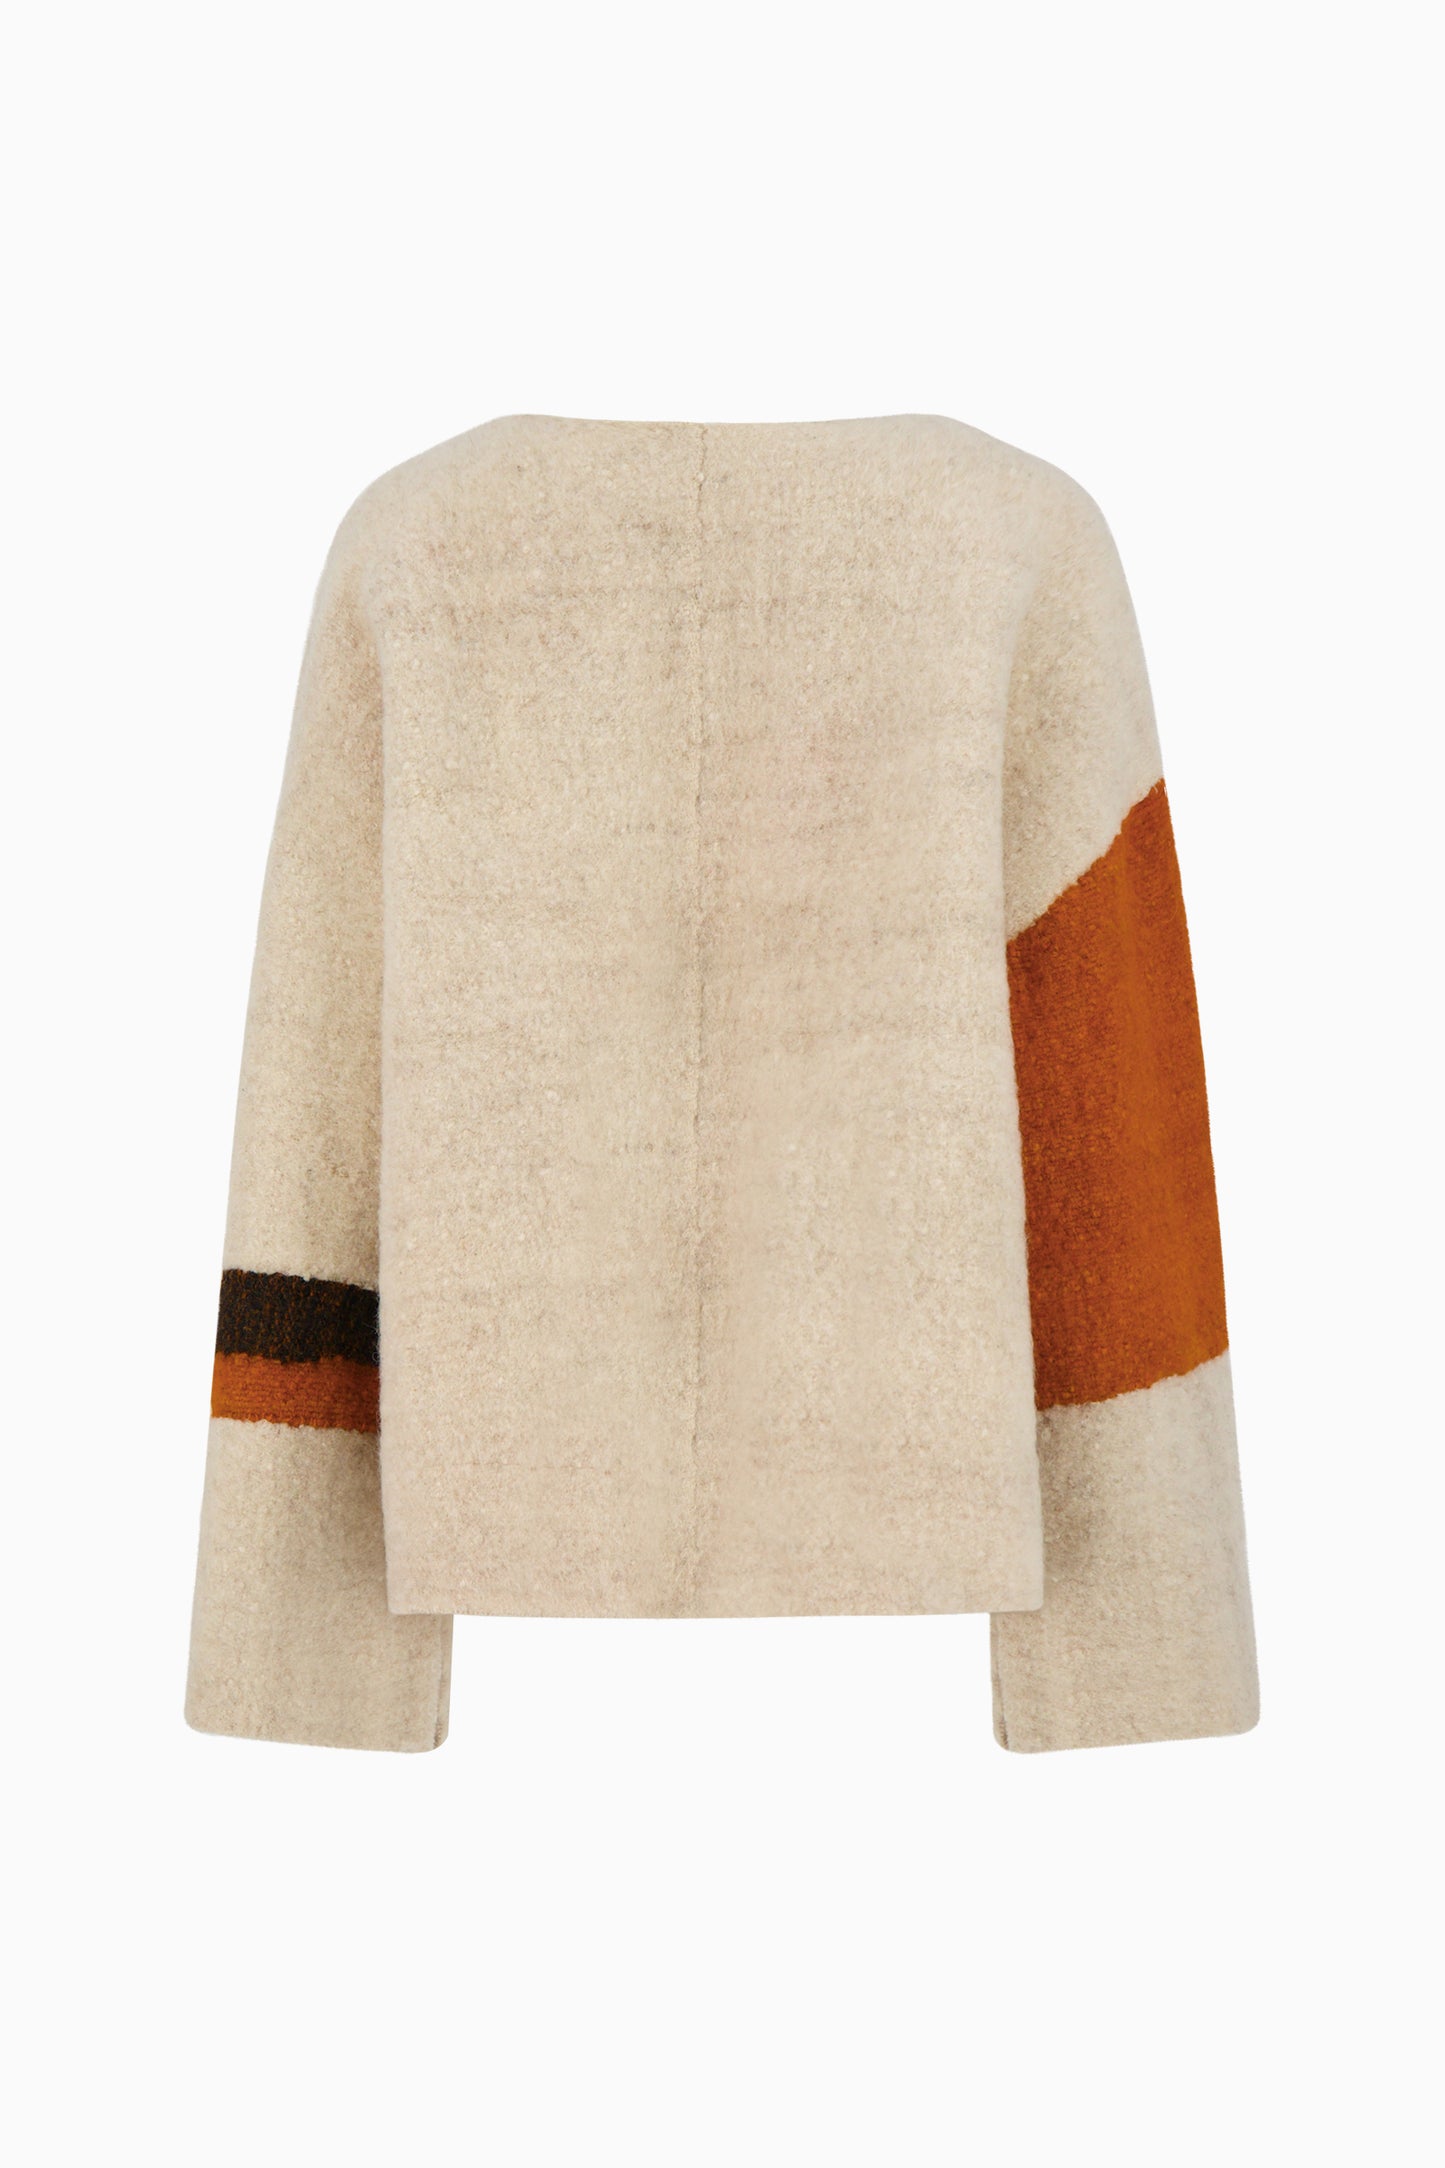 Coat with Orange and Brown Patches